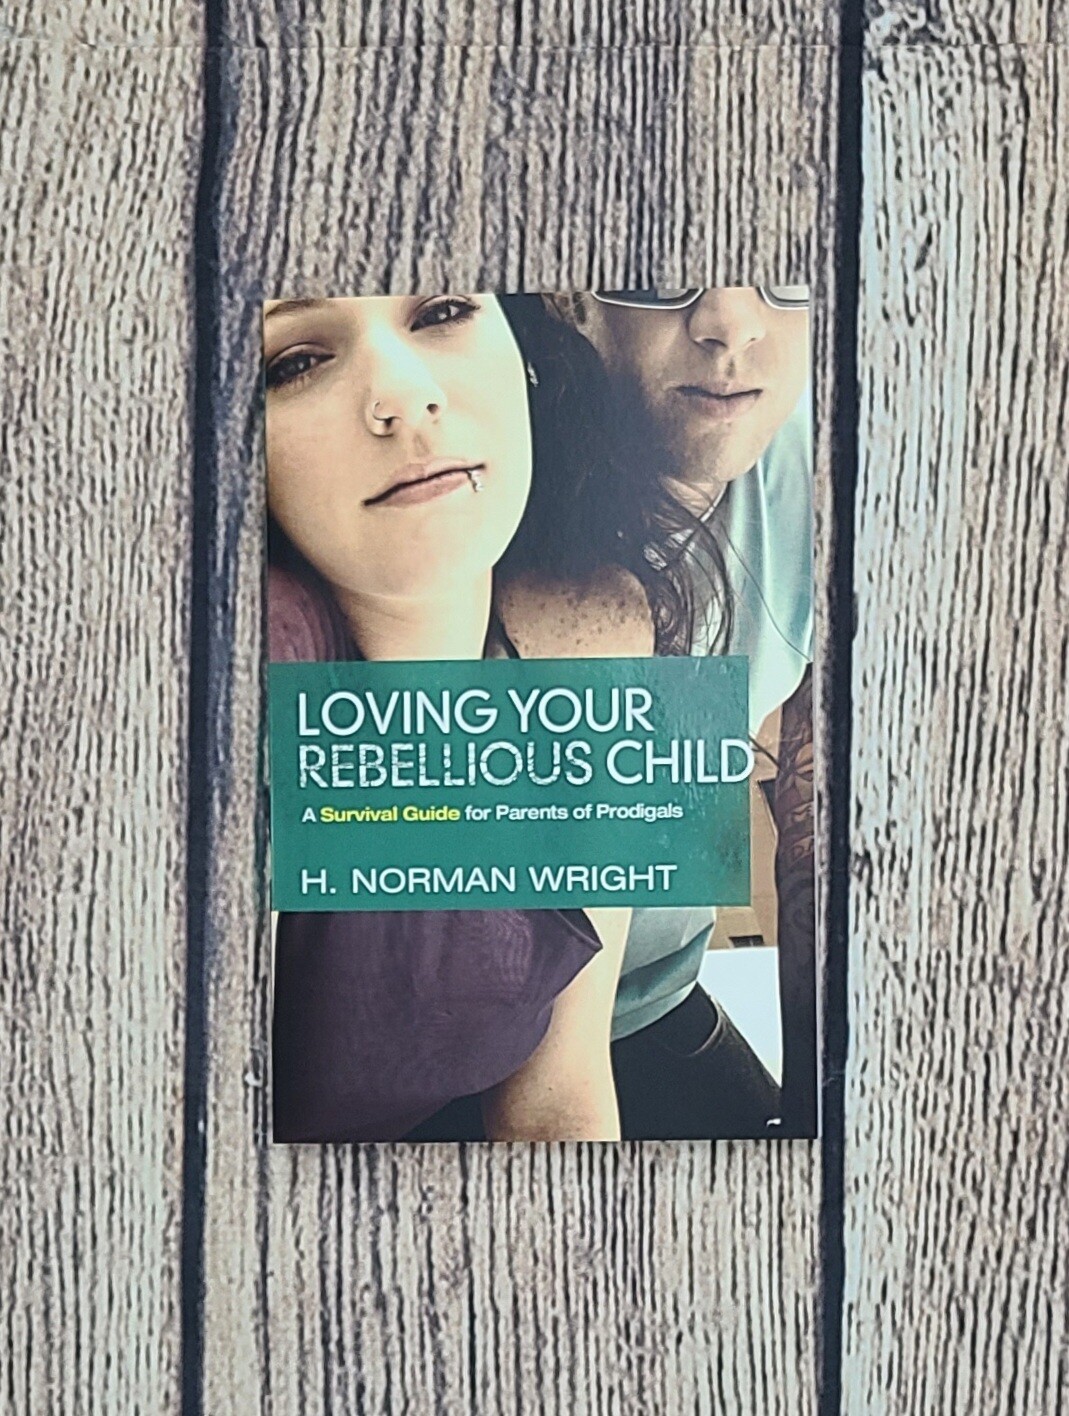 Loving Your Rebellious Child by H. Norman Wright